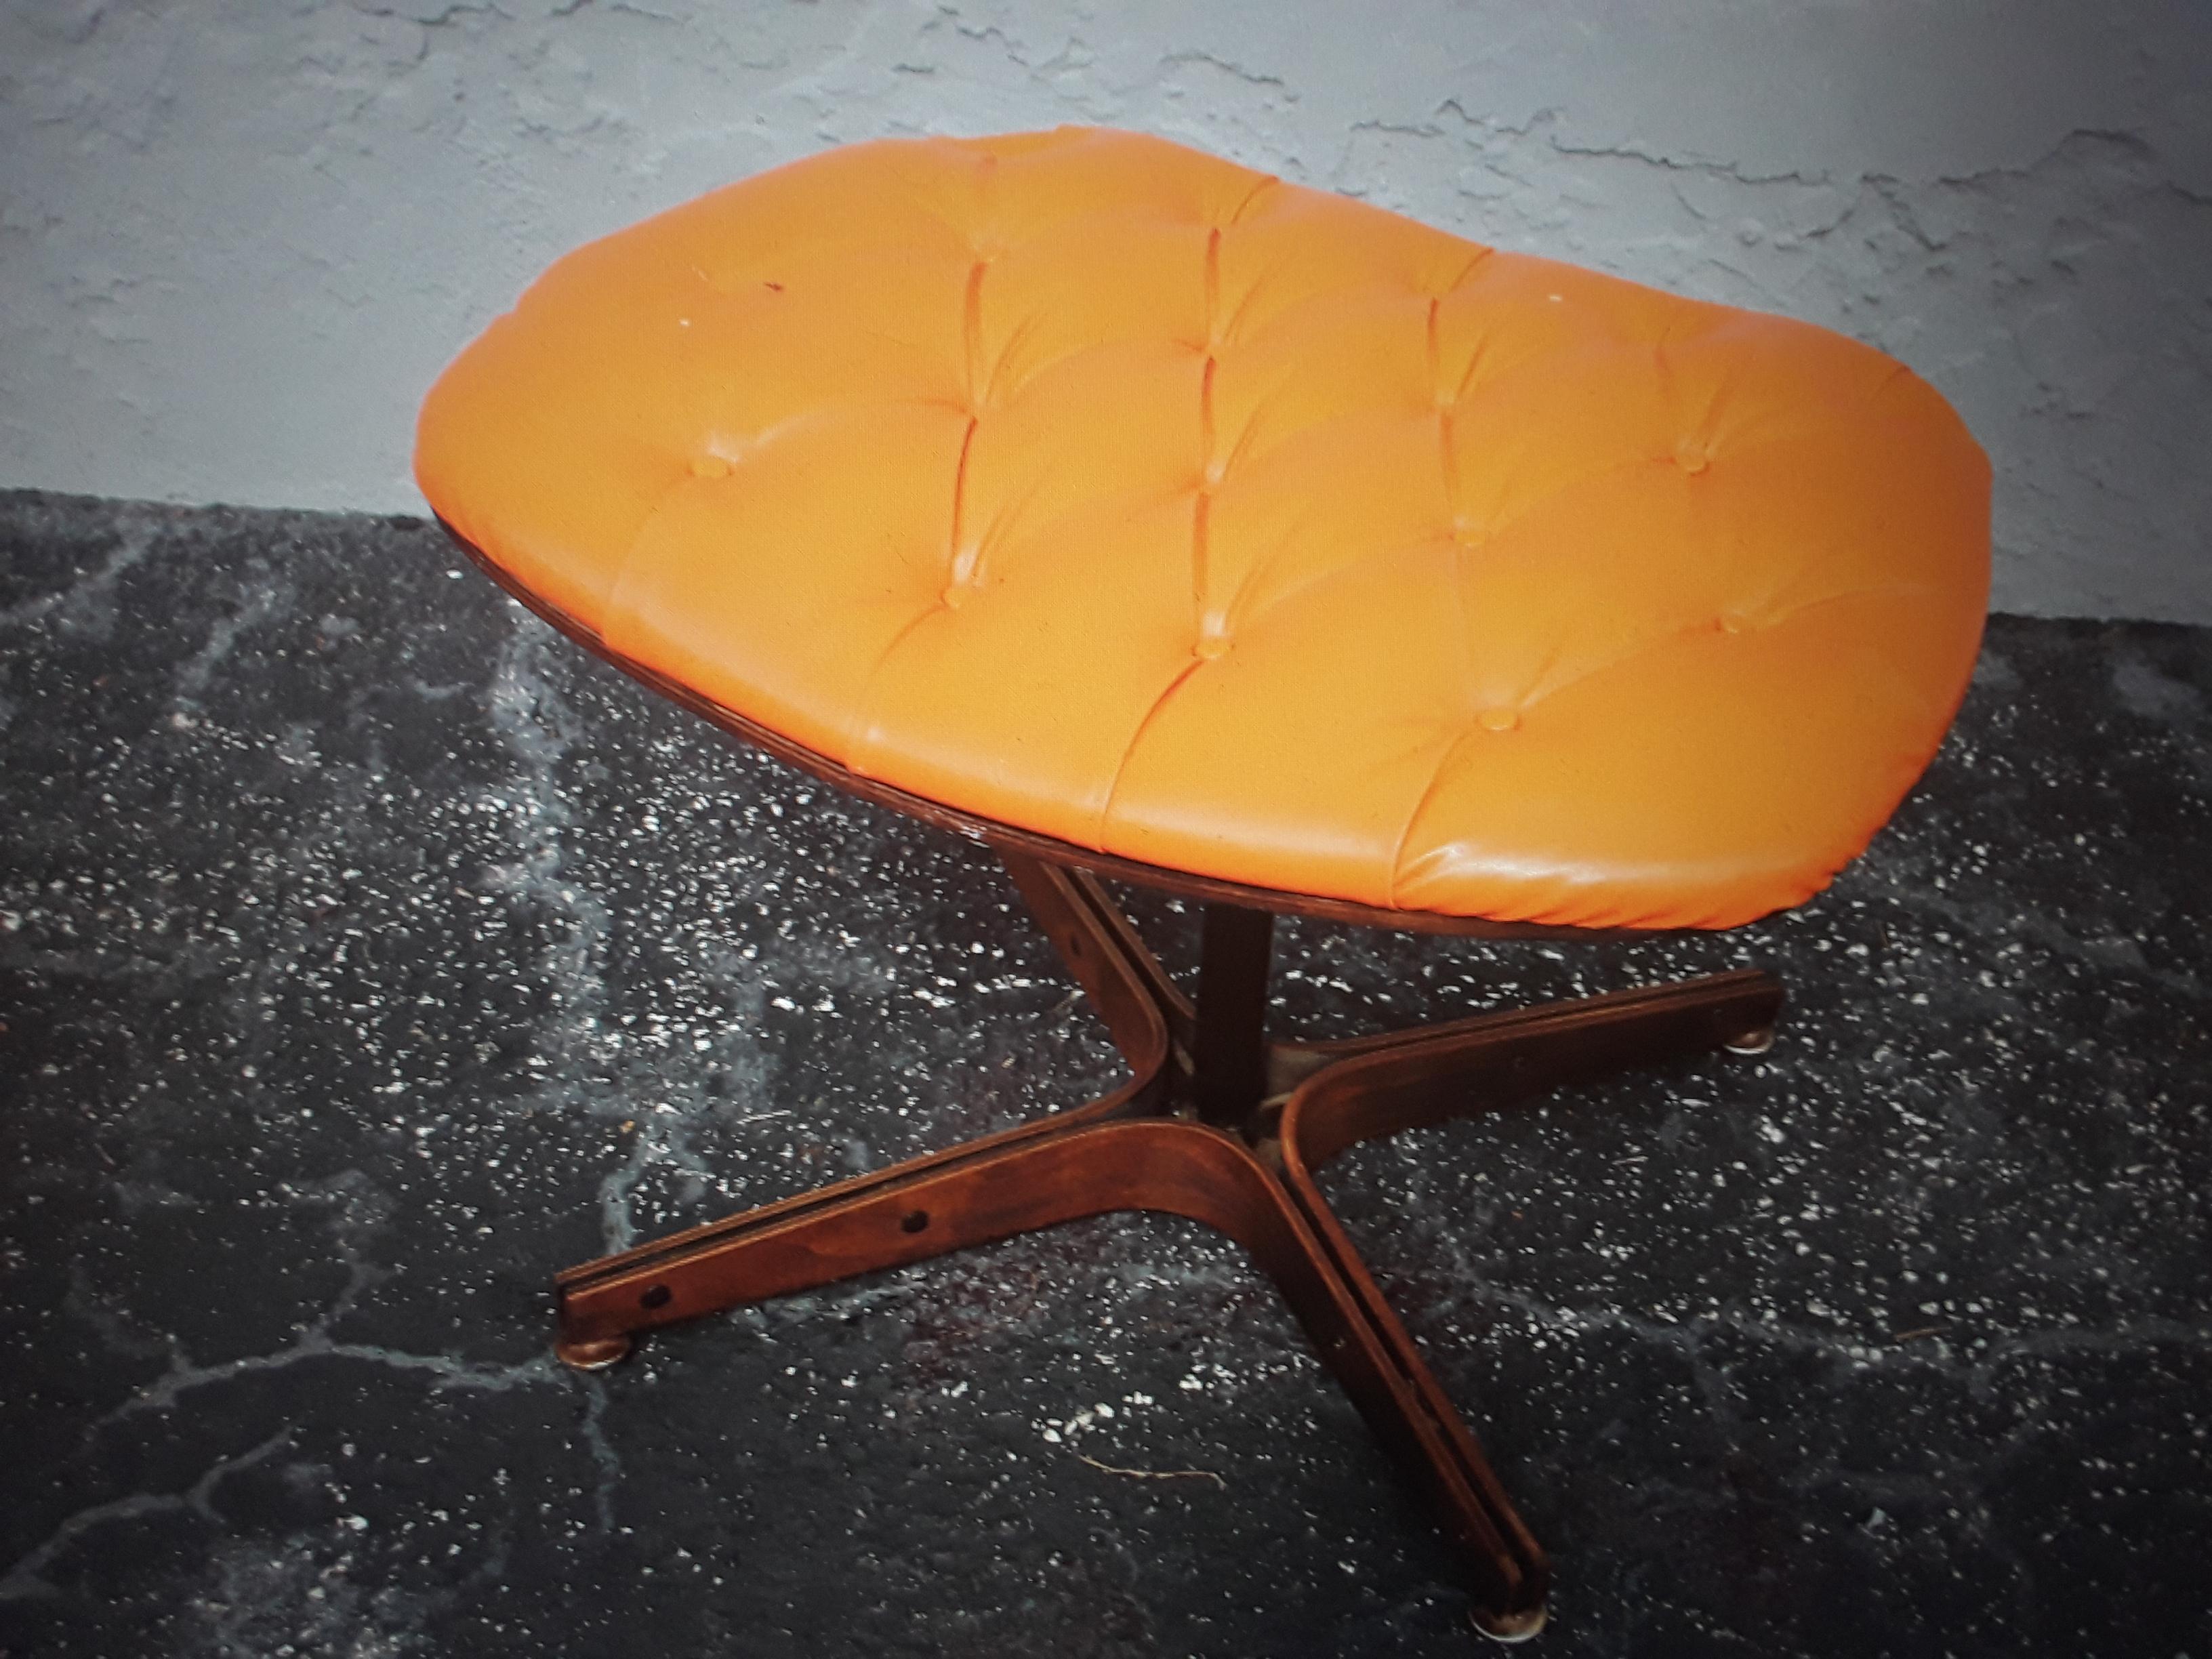 1960's Mid Century Modern Orange Tufted Vinyl Foot Stool. I found this piece interesting. I love the color.